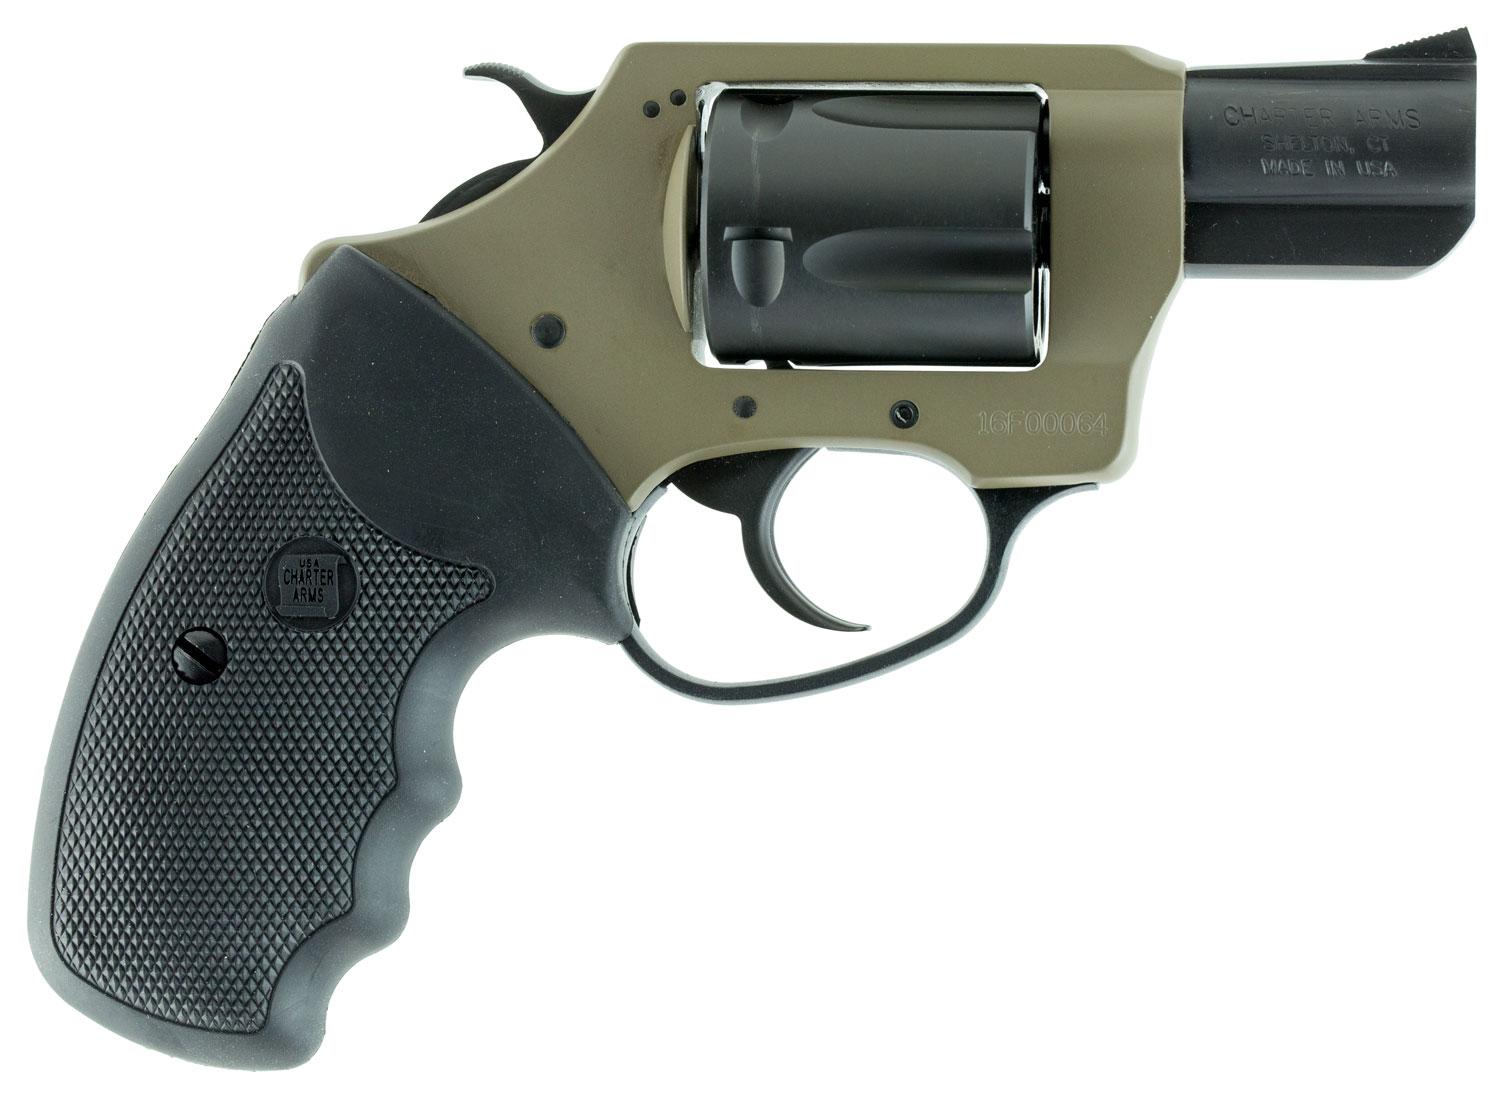 Charter Arms Undercover Earthborn Revolver 53863, 38 Special, 2", Black Rubber Grips, 5 Rd